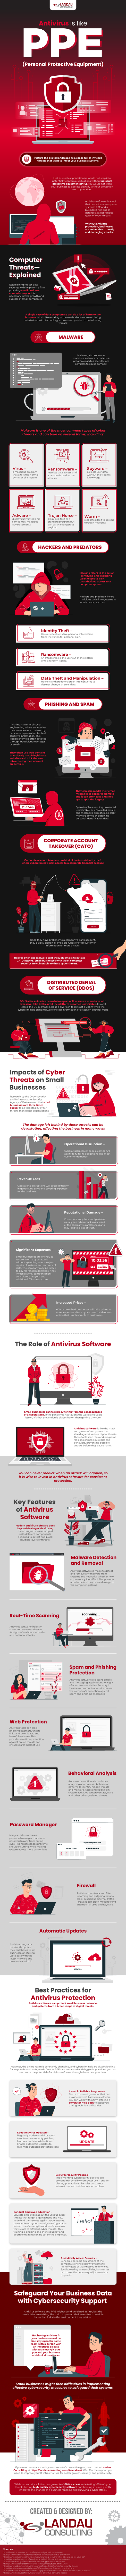 Antivirus-is-like-PPE-for-your-Computer-infographic-image-01